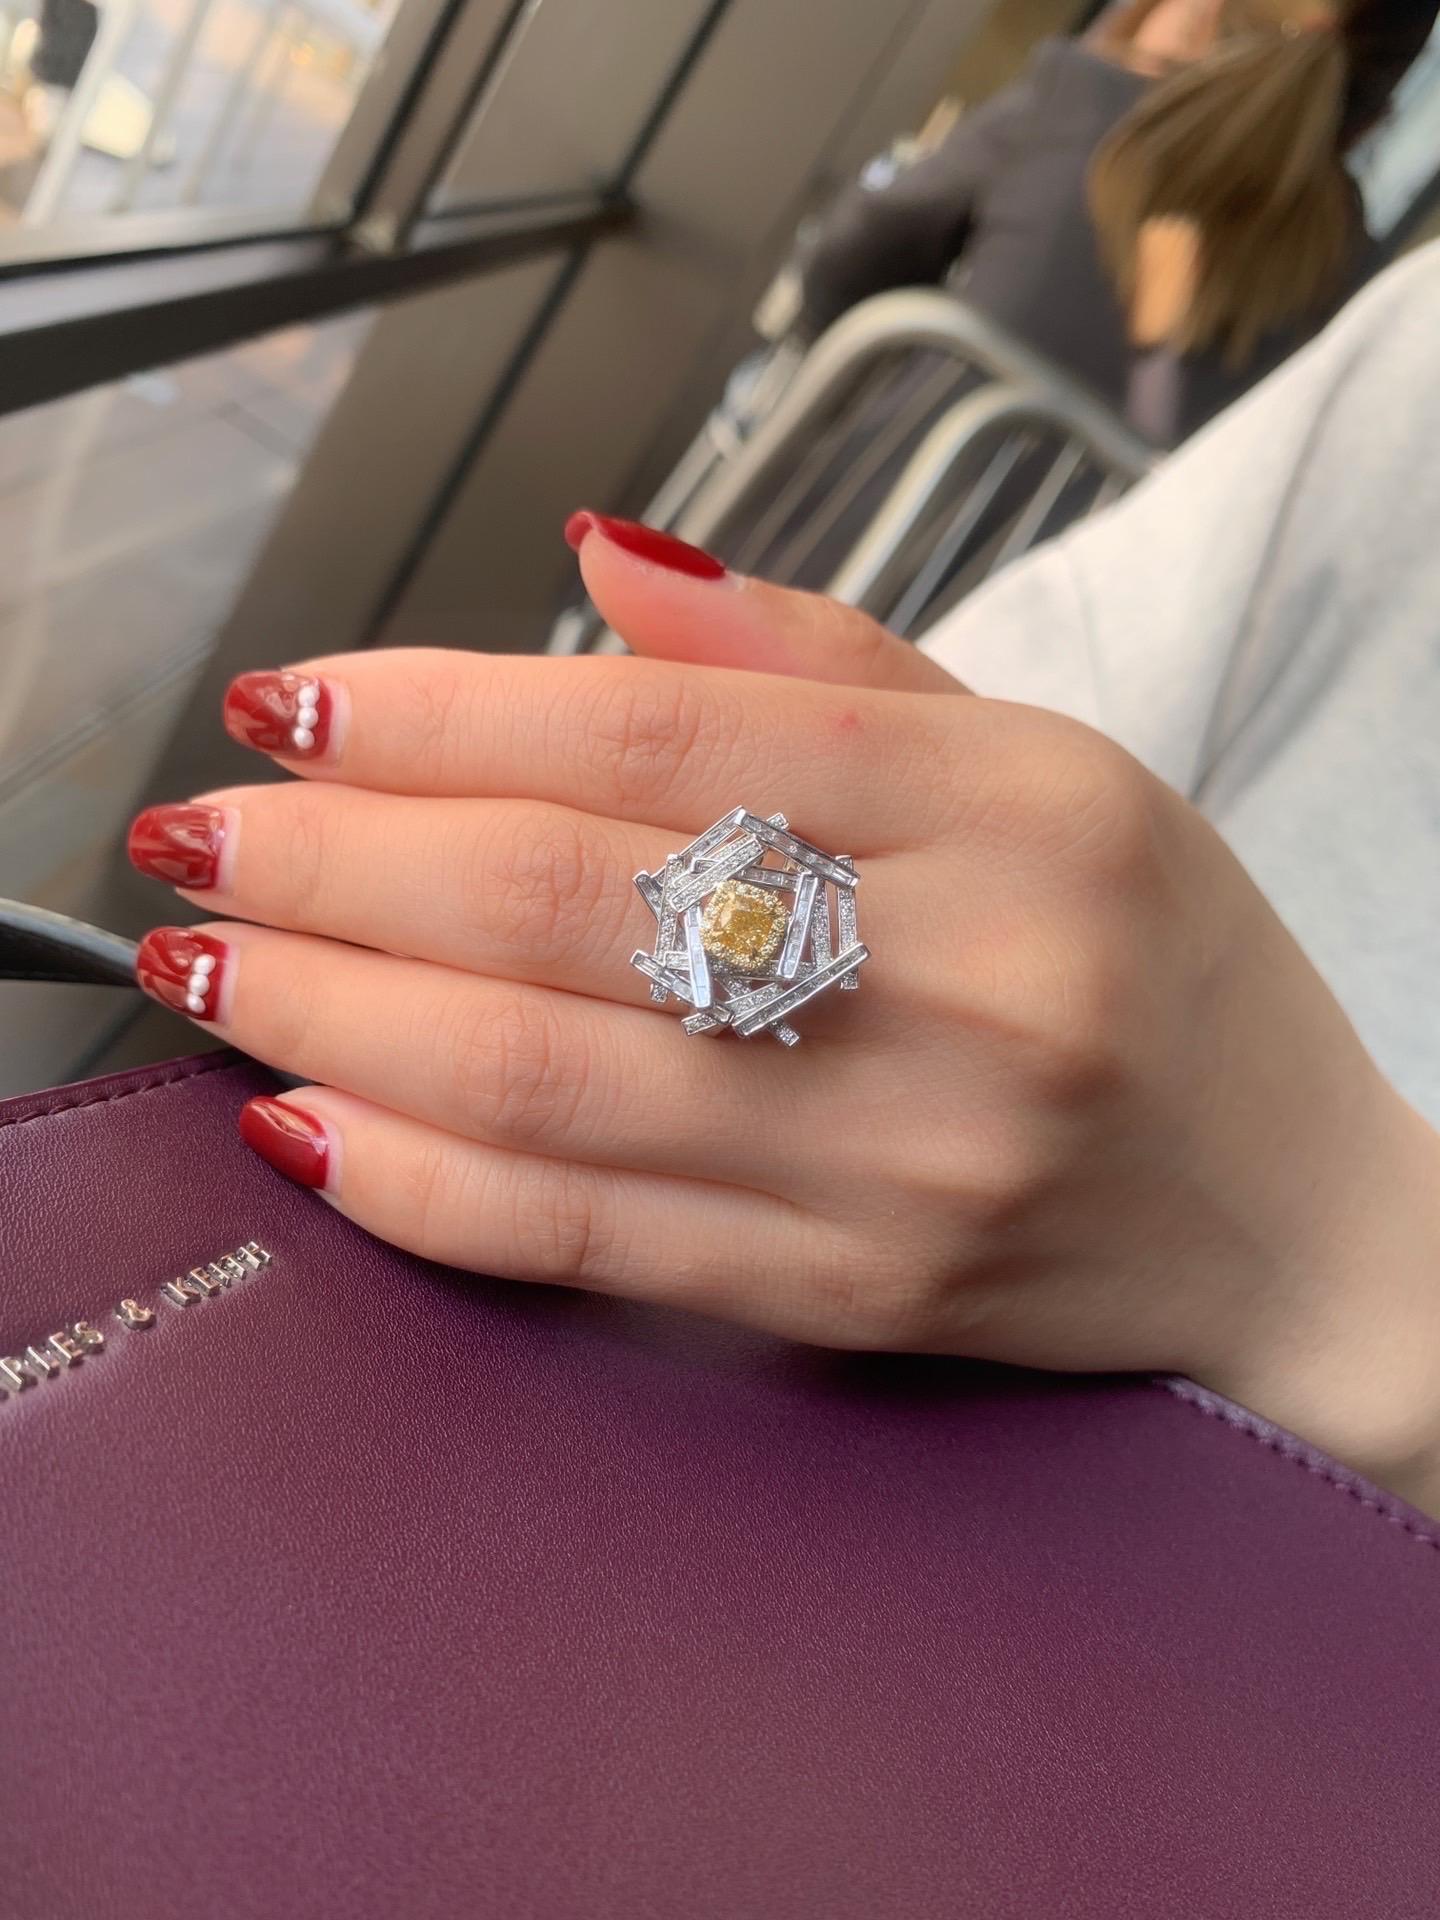 Yellow Diamond Ring 18k White Gold Diamond Jewelry Luxury Jewelry
mosaic material
diamond
Precious Metal Condition
18K white gold　
Certificate of authenticity
Appraisal certificate
color
18k white gold
Processing technology
diamond